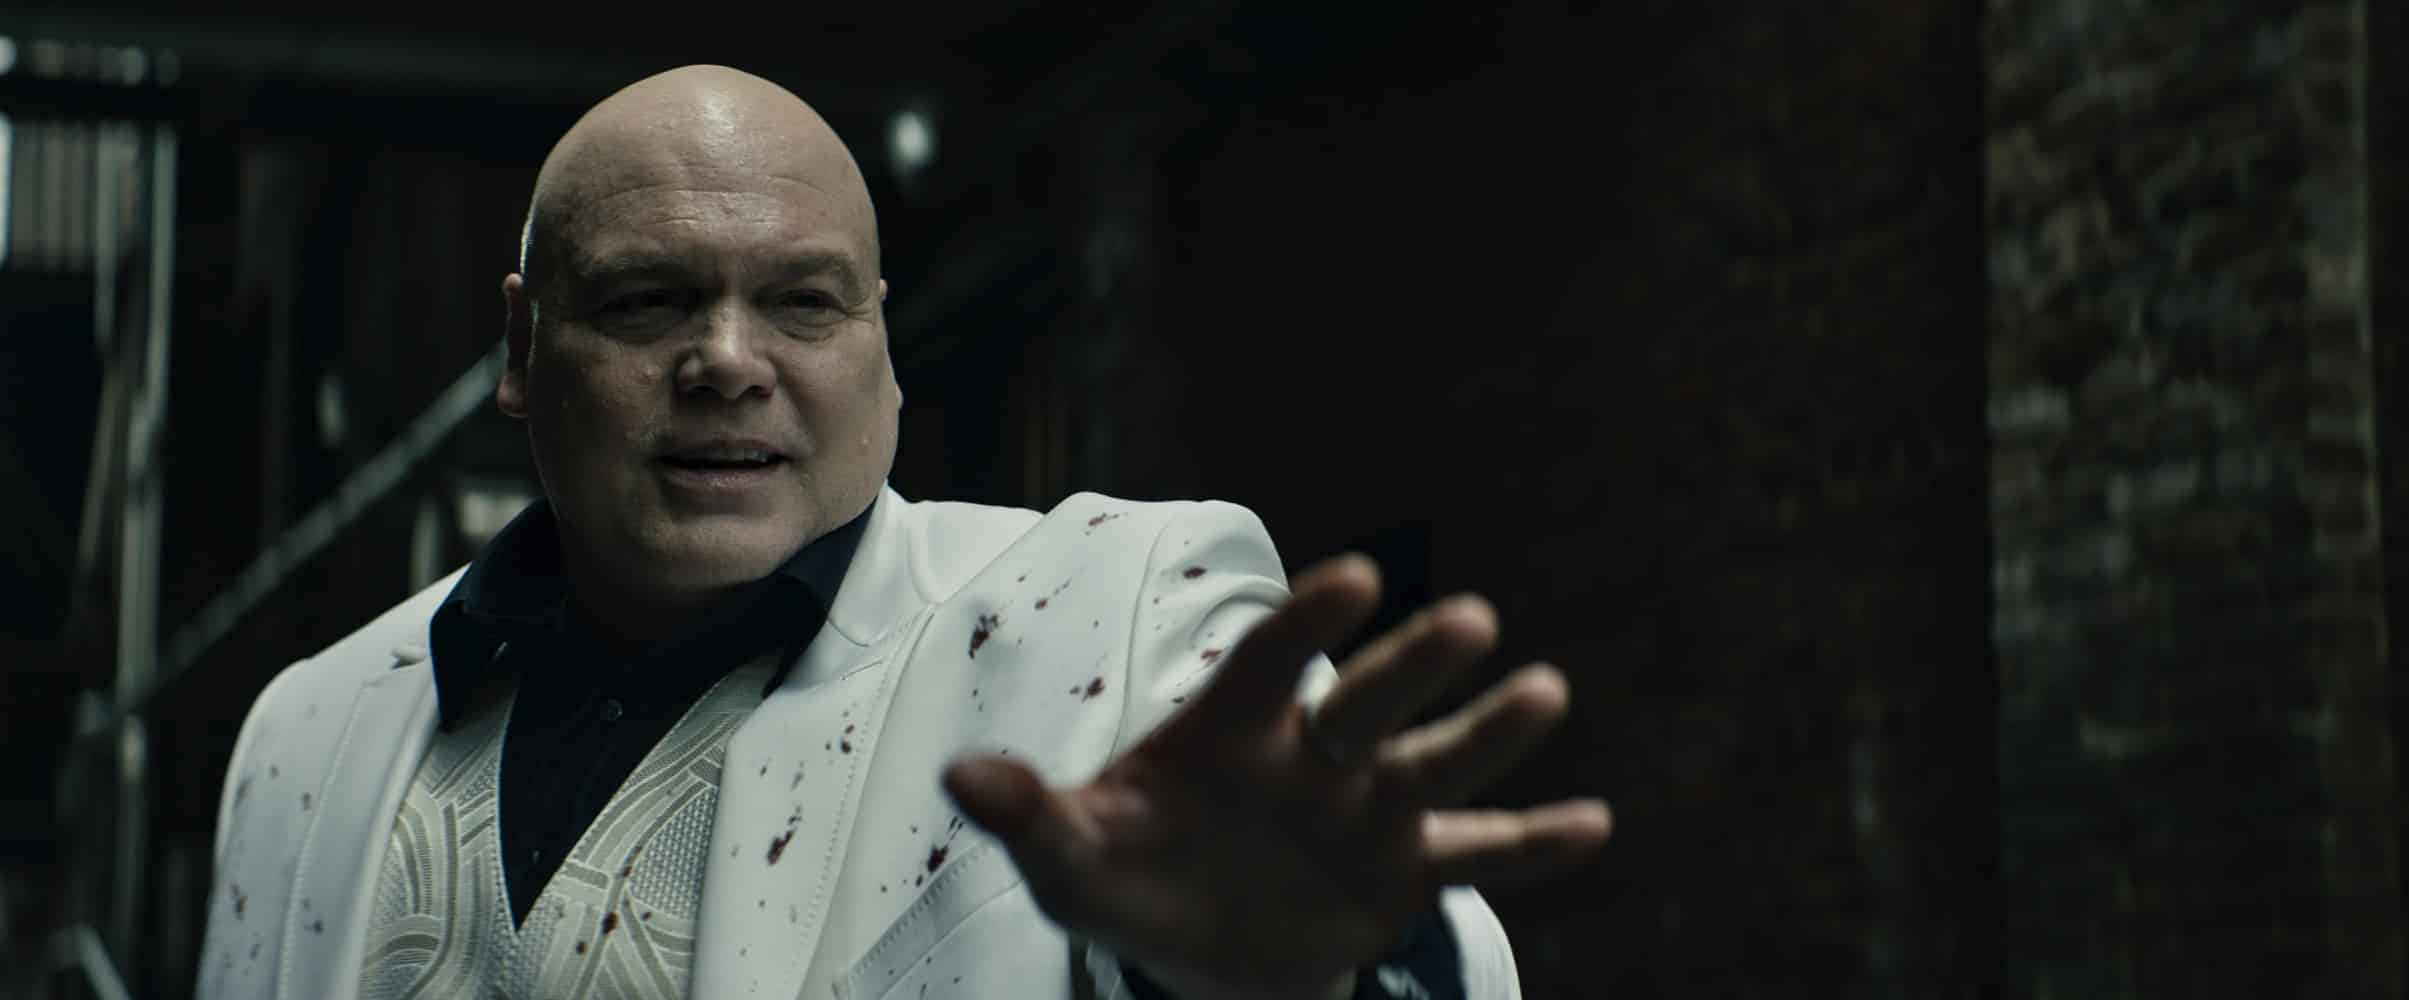 Fisk, a large, bald white male character portrayed by Vincent D'Onofrio, wears a white suit and holds out his hand in a plea.